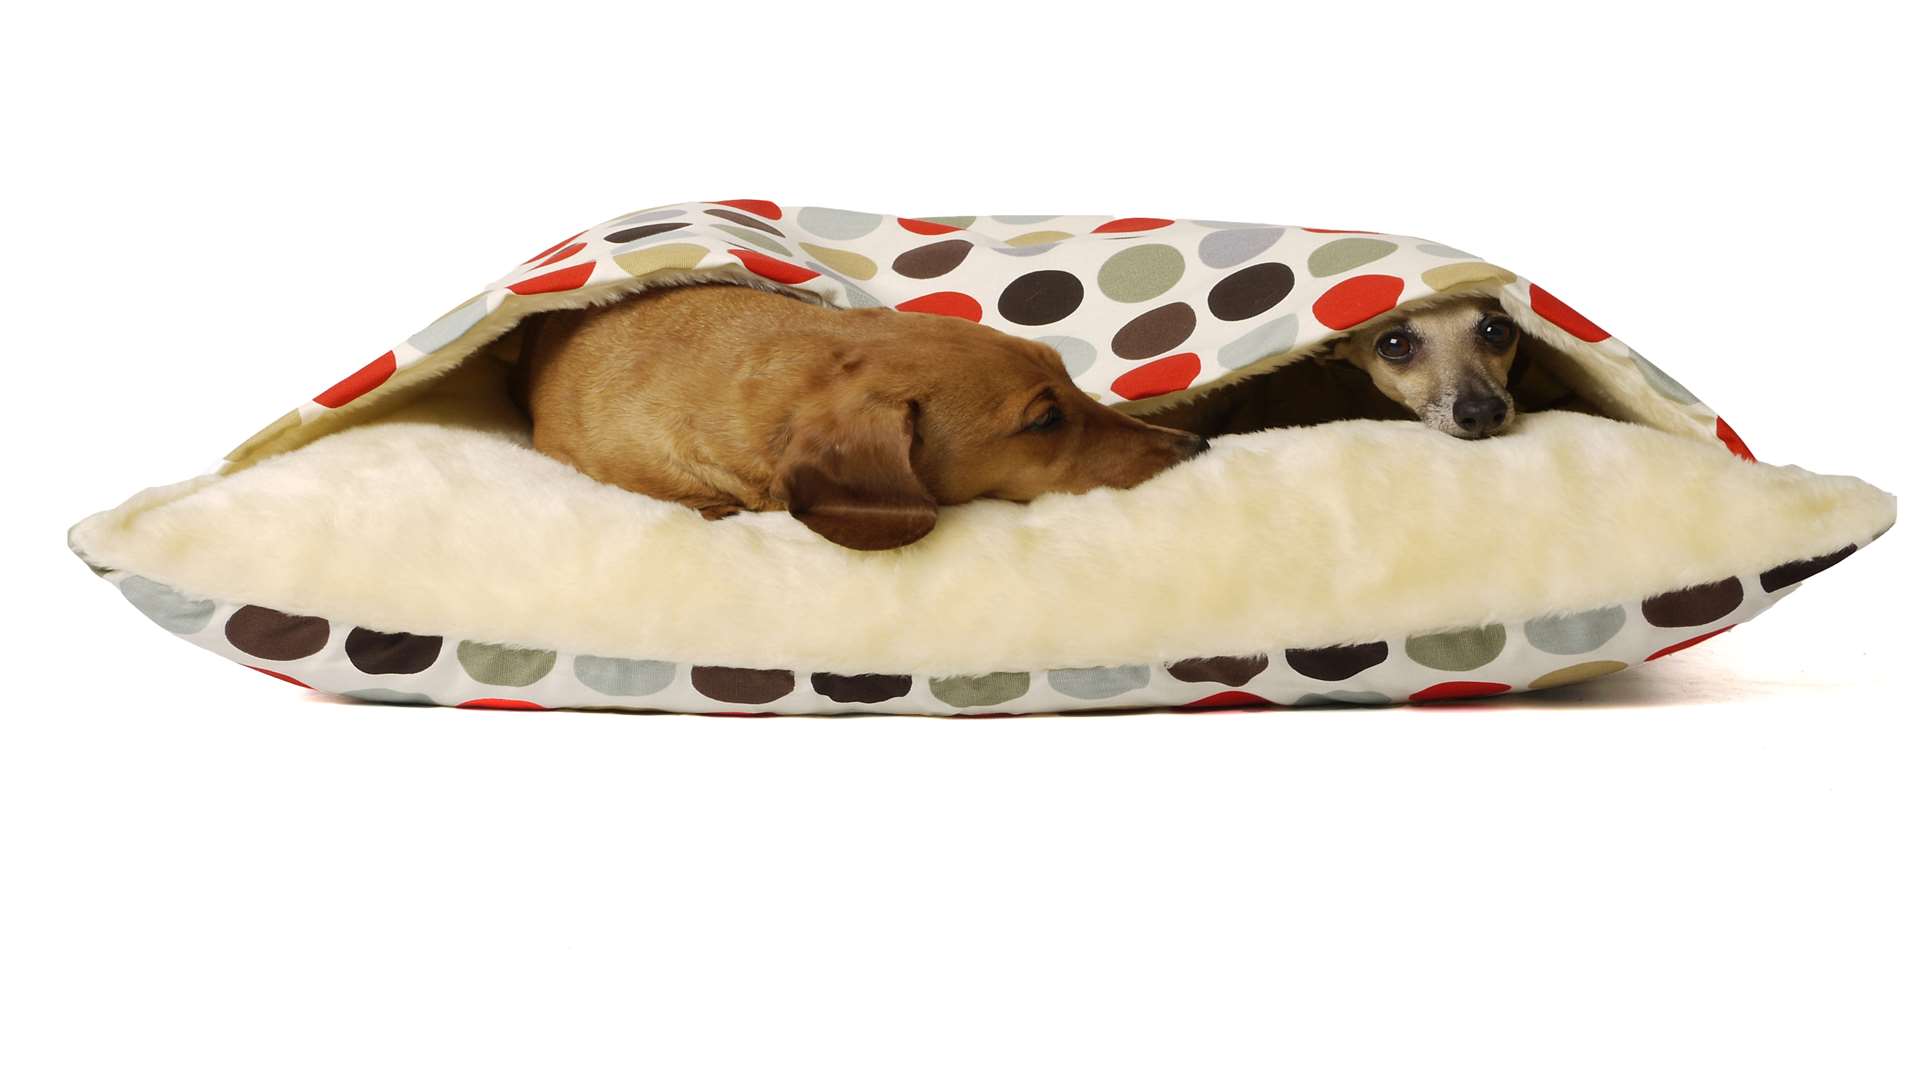 What dog wouldn't want to cuddle up in this dog bed?